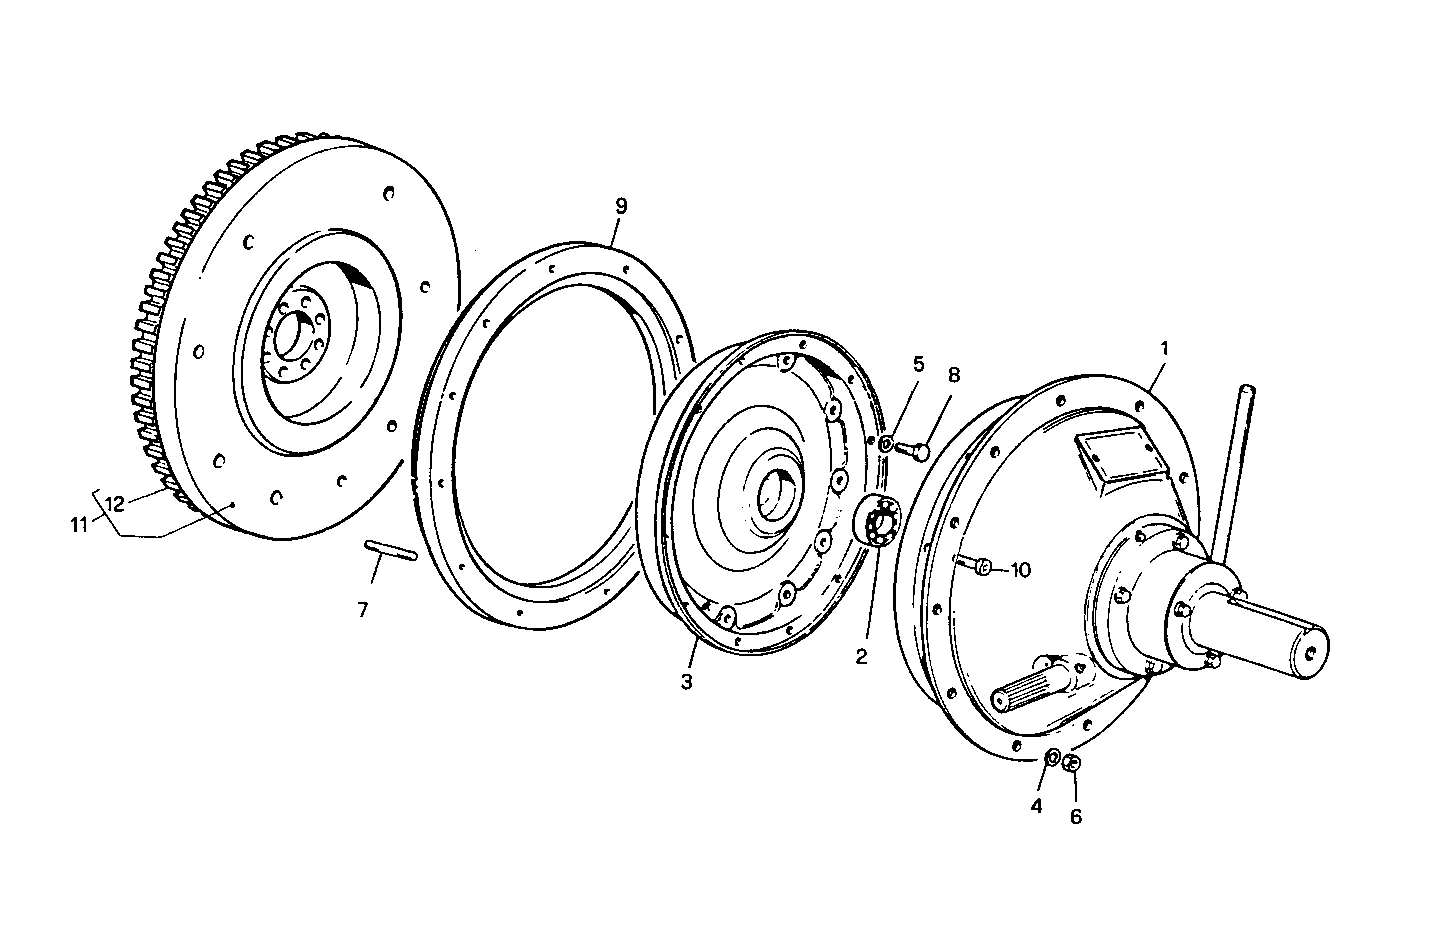 Iveco/FPT TRIDISC INDUSTRIAL CLUTCH